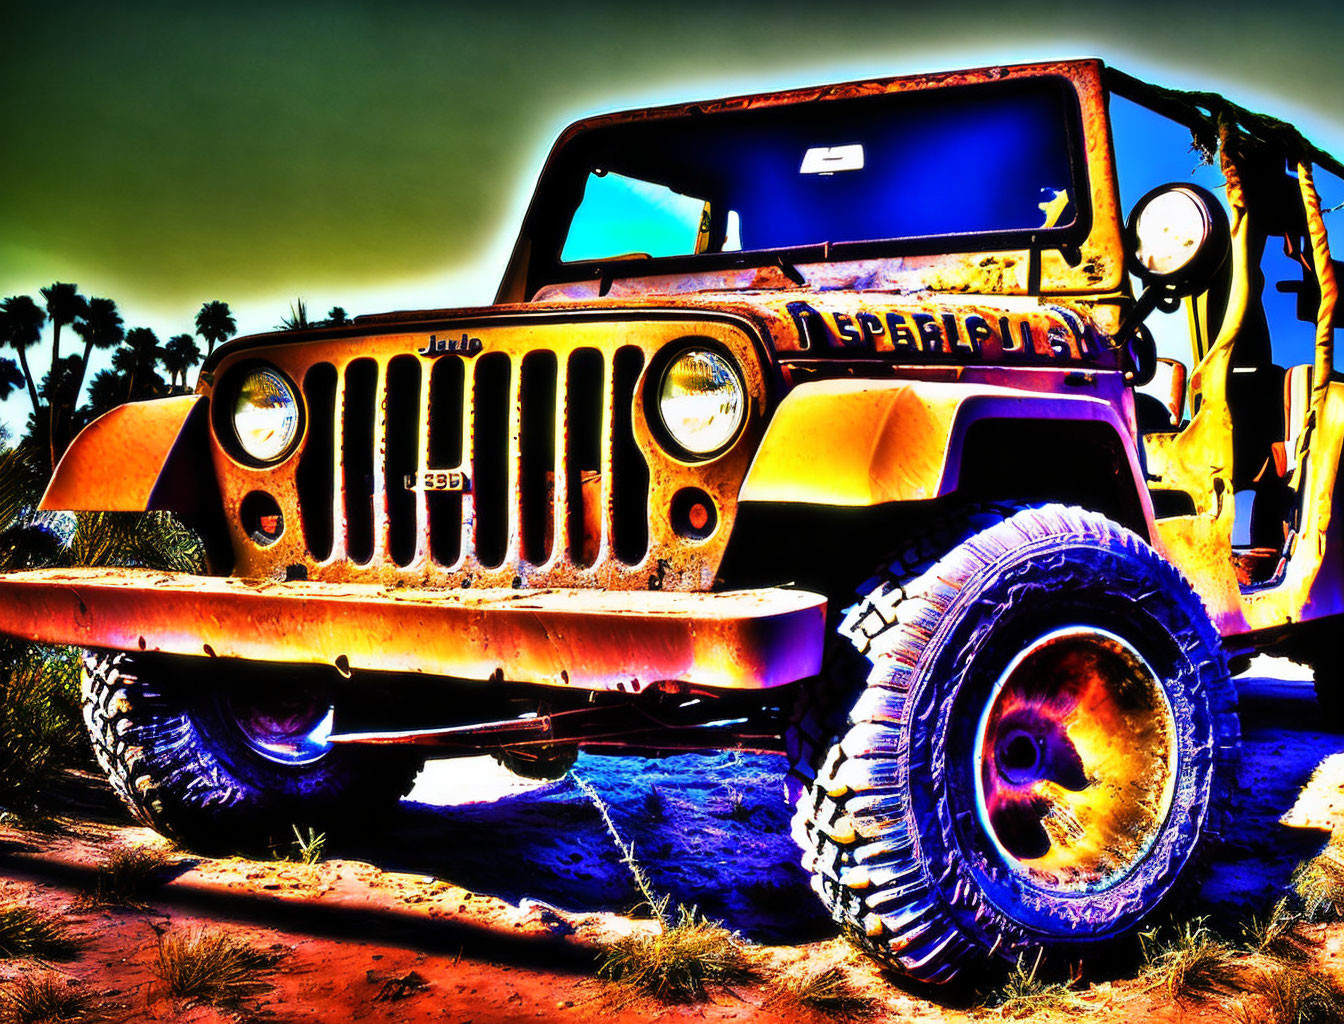 Vibrant yellow Jeep Wrangler in desert with exaggerated edits